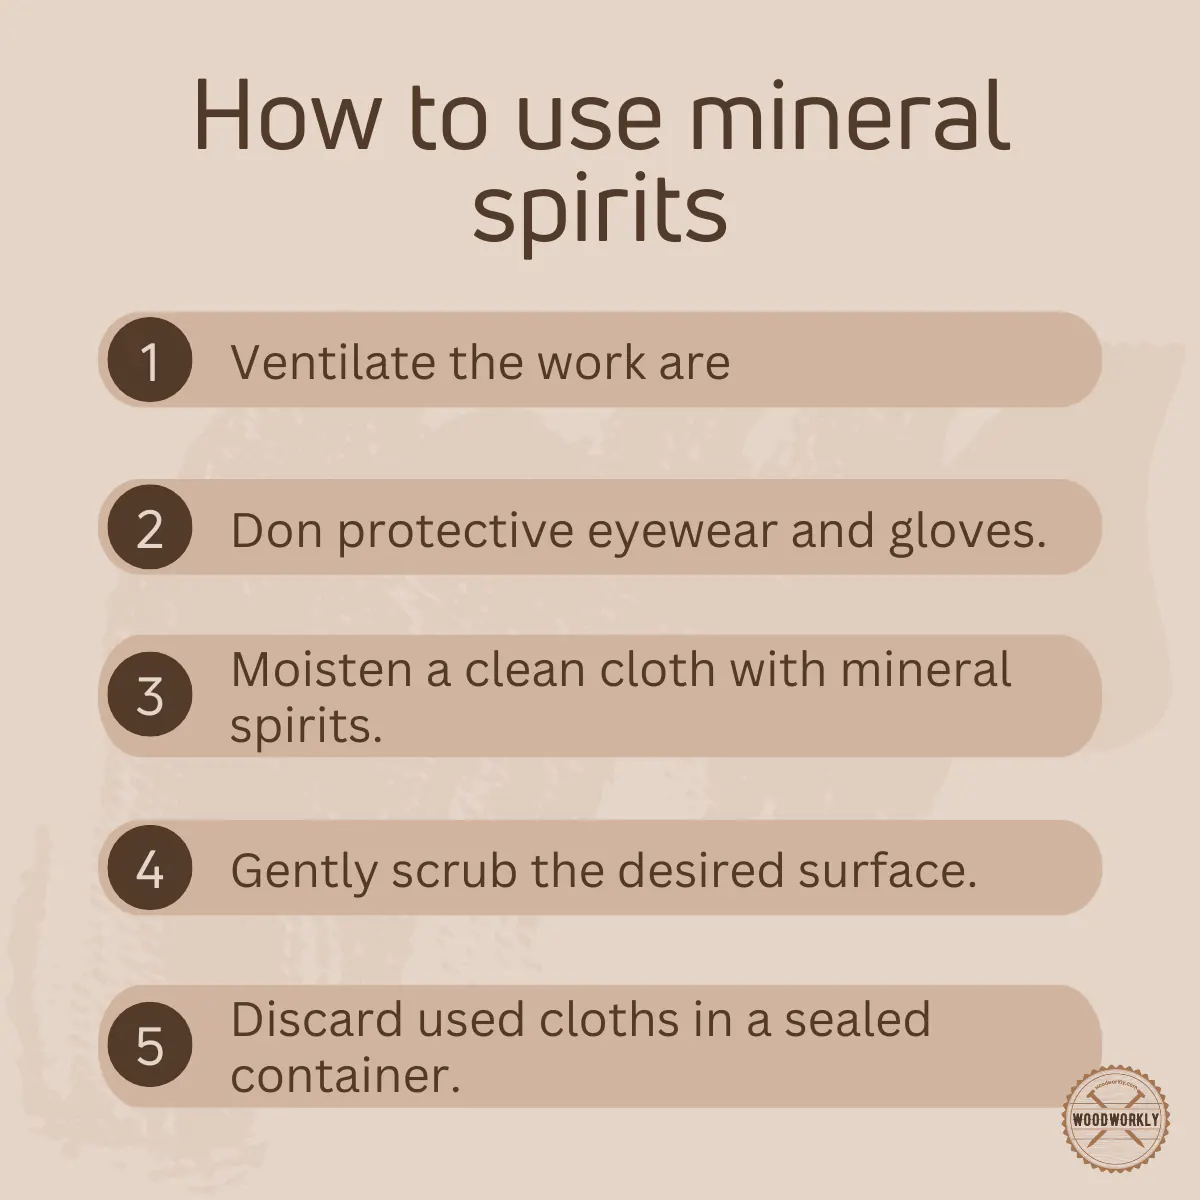 How to use mineral spirits